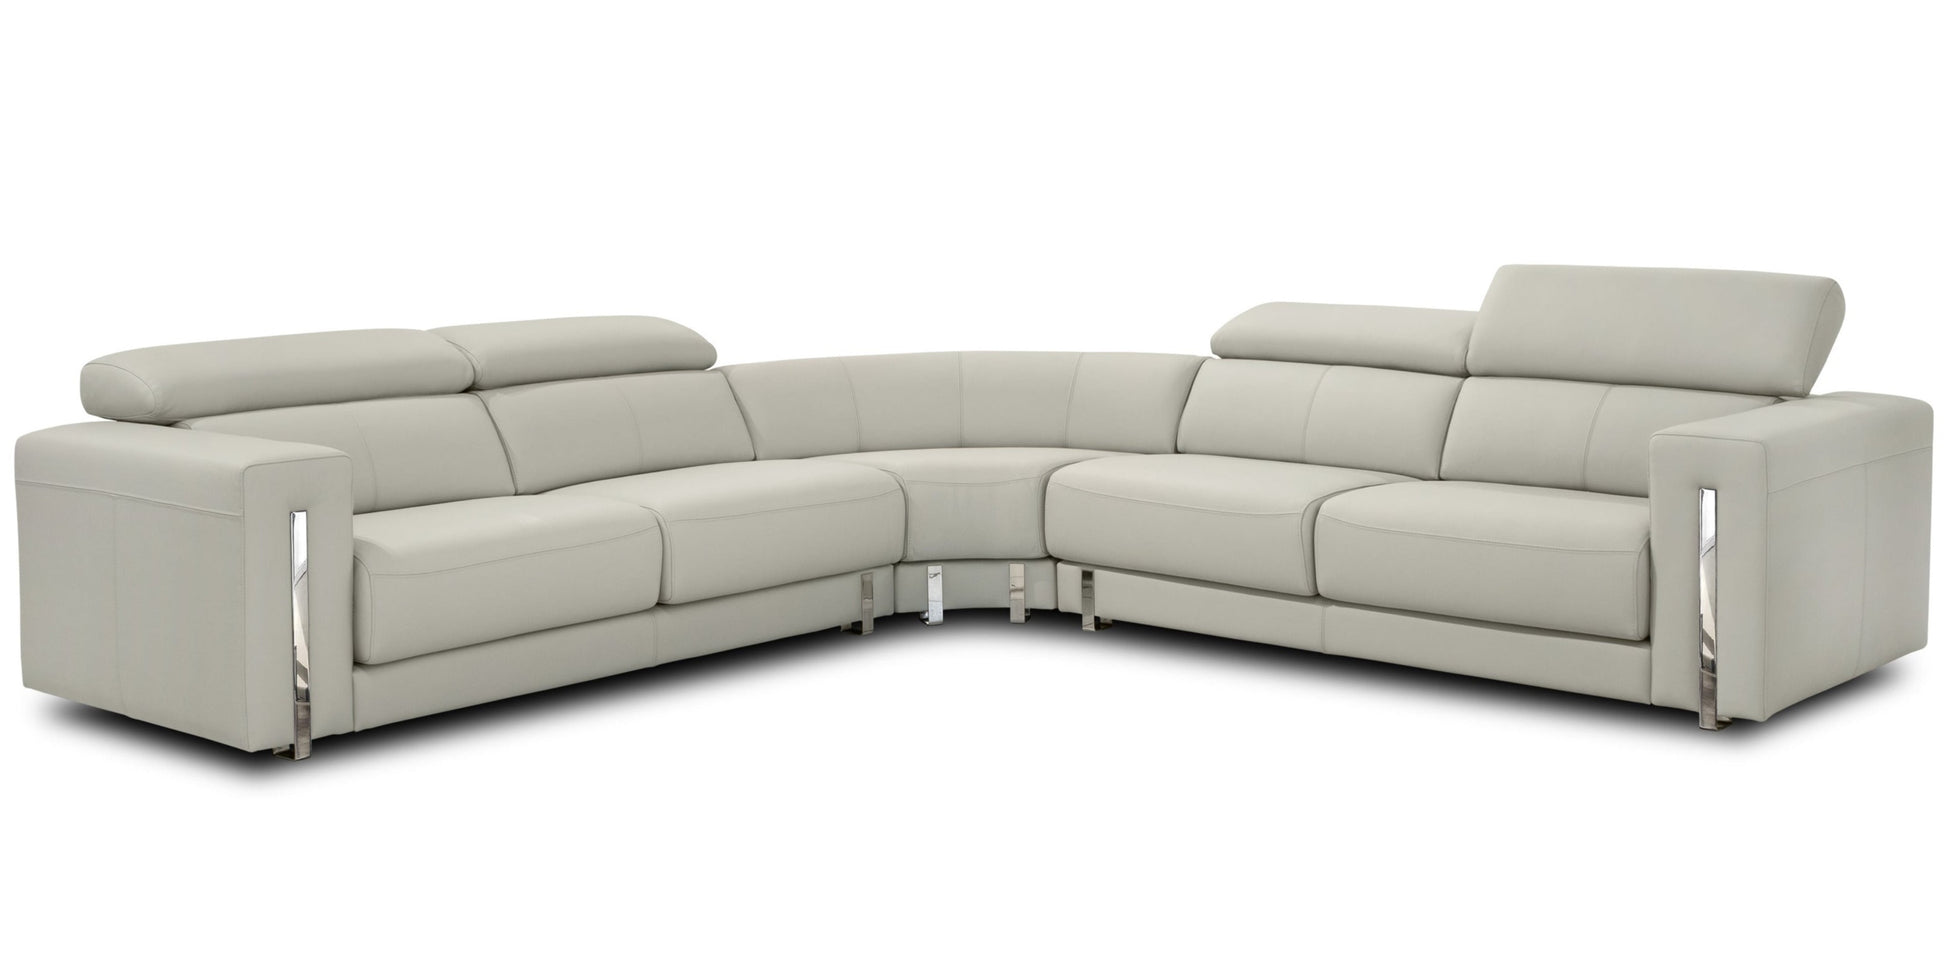 Large Light grey leather corner sofa with adjustable headrests and sound docking station and removable ottomans.